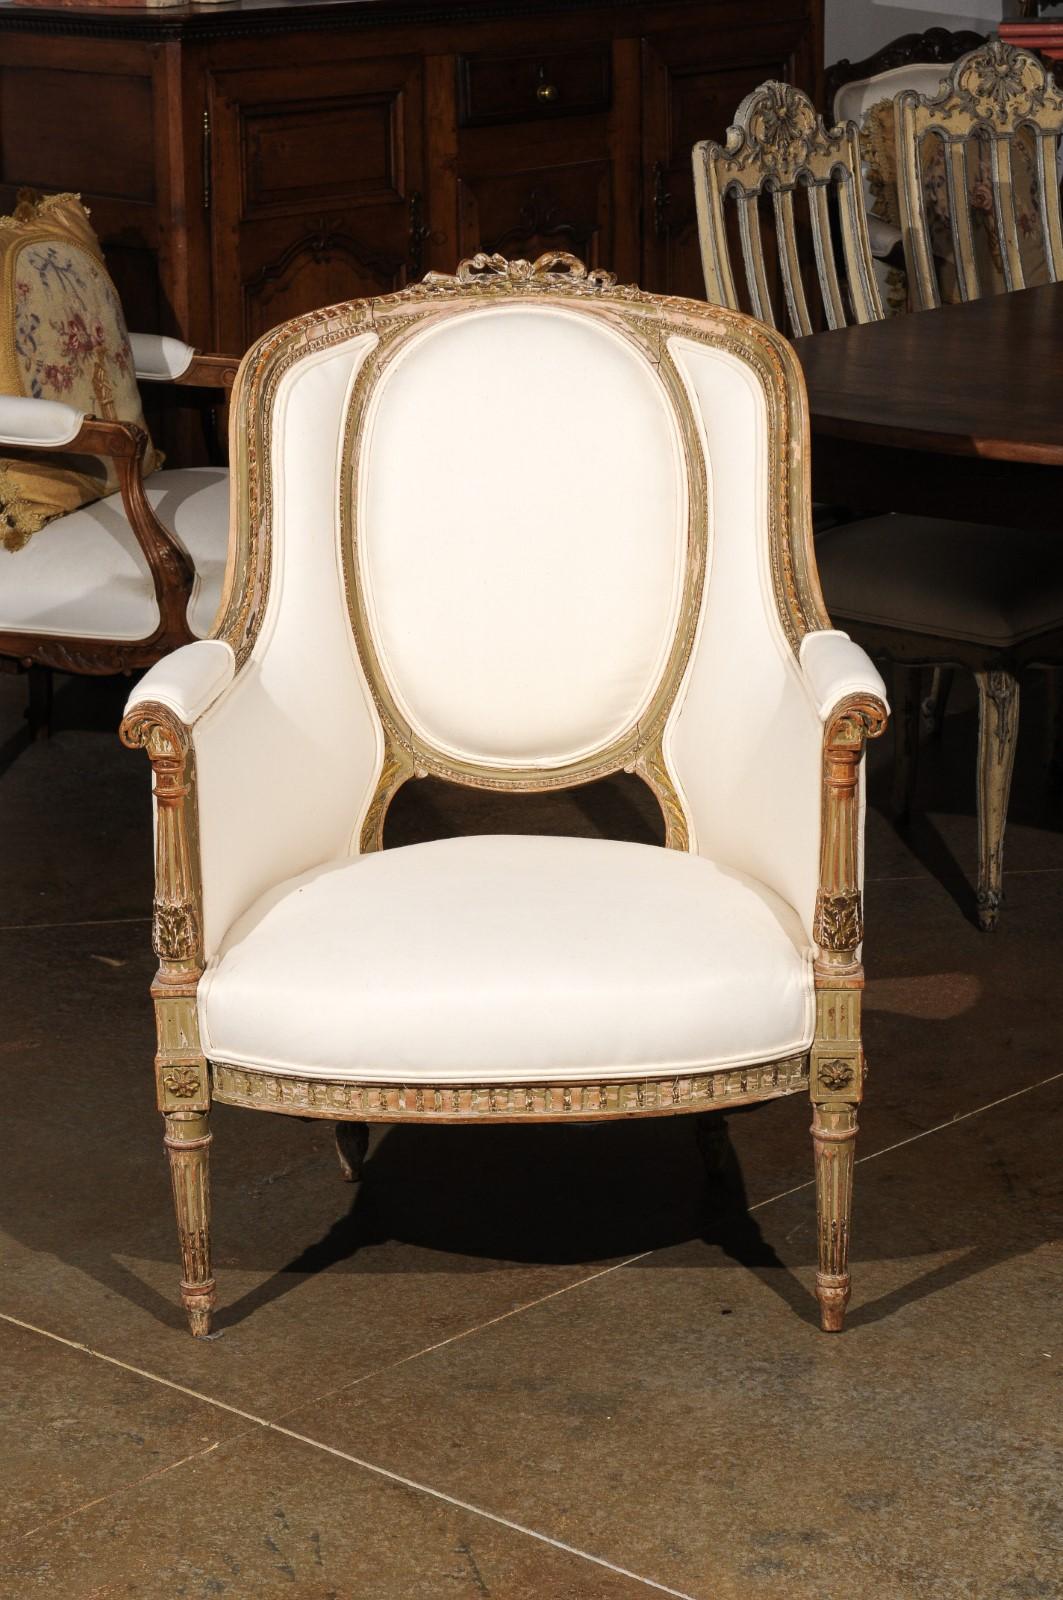 A French Louis XVI style bergère chair from the 19th century, with distressed painted finish, fluted accents, ribbon carved motif and new upholstery. Born in France during the 19th century, this exquisite armchair presents the stylistic